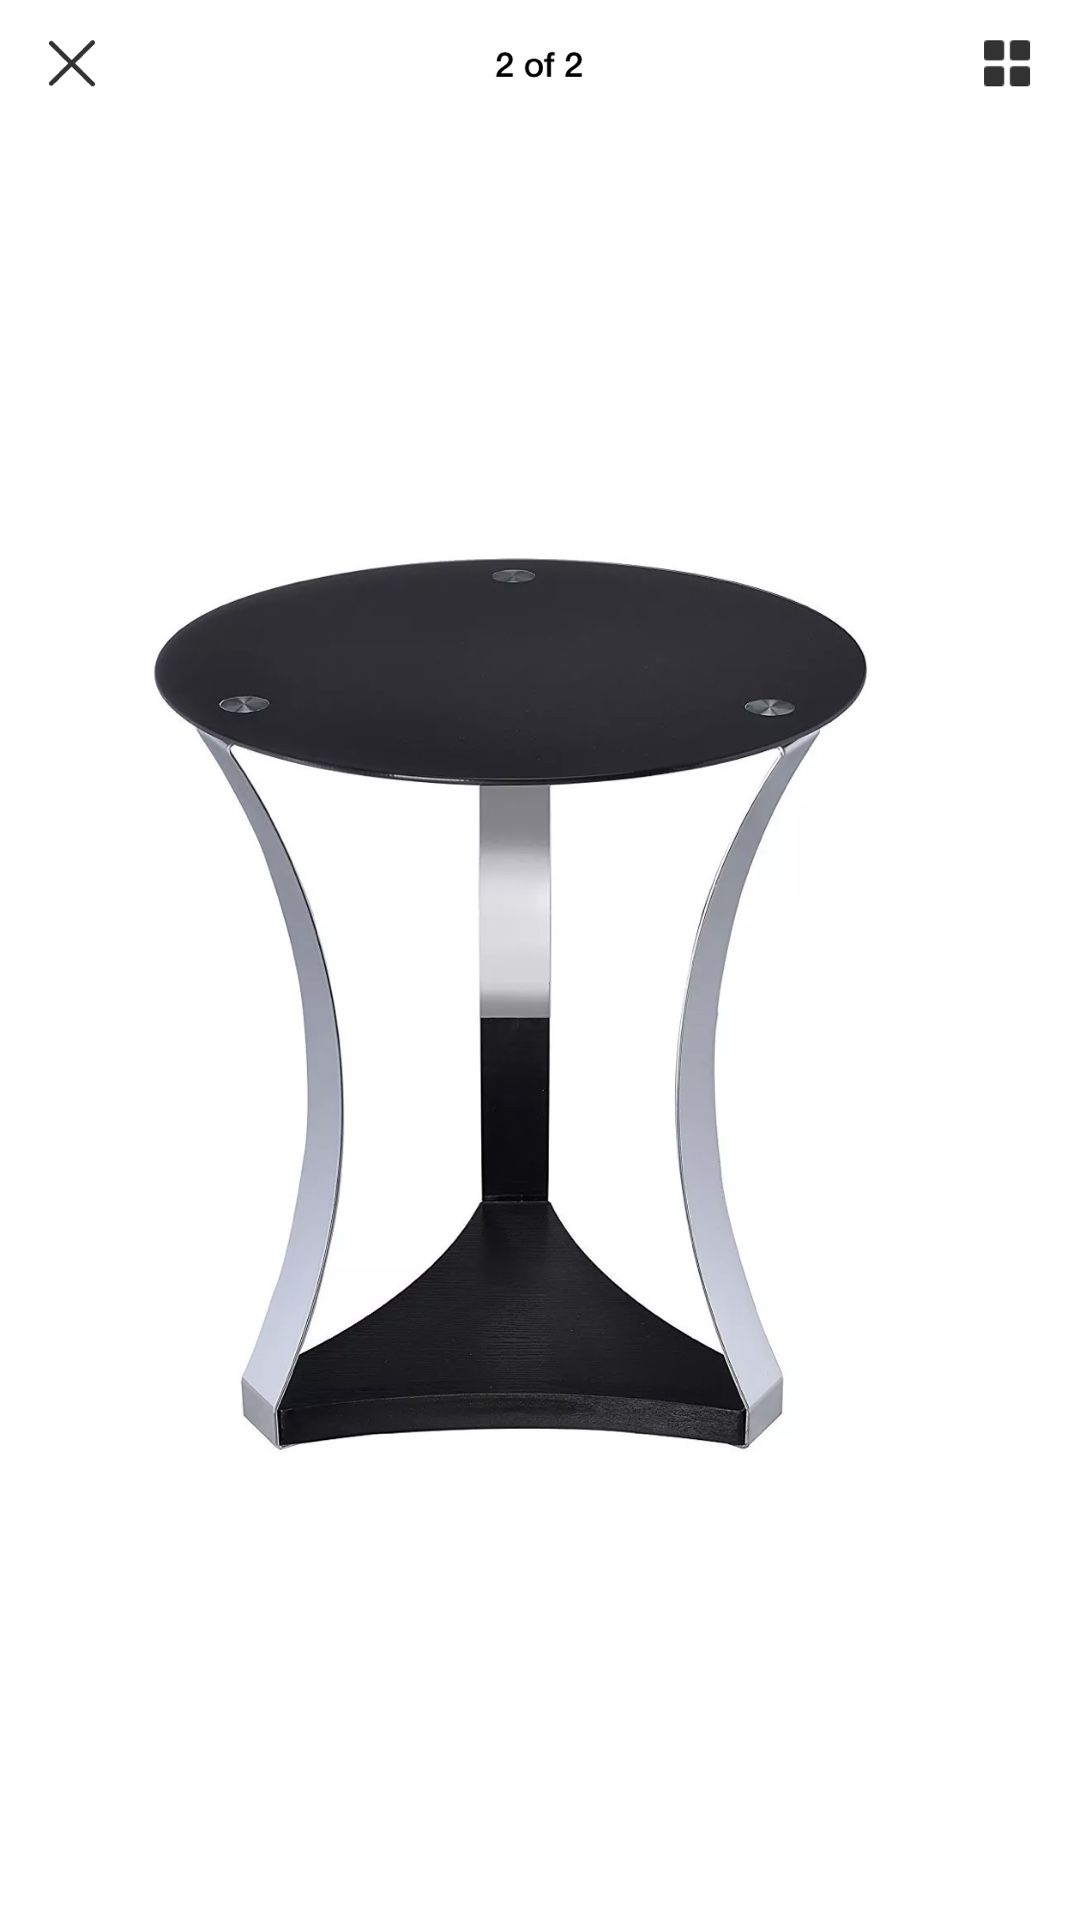 ACME Furniture Geiger Collection End Table in Black Glass and Chrome Frame